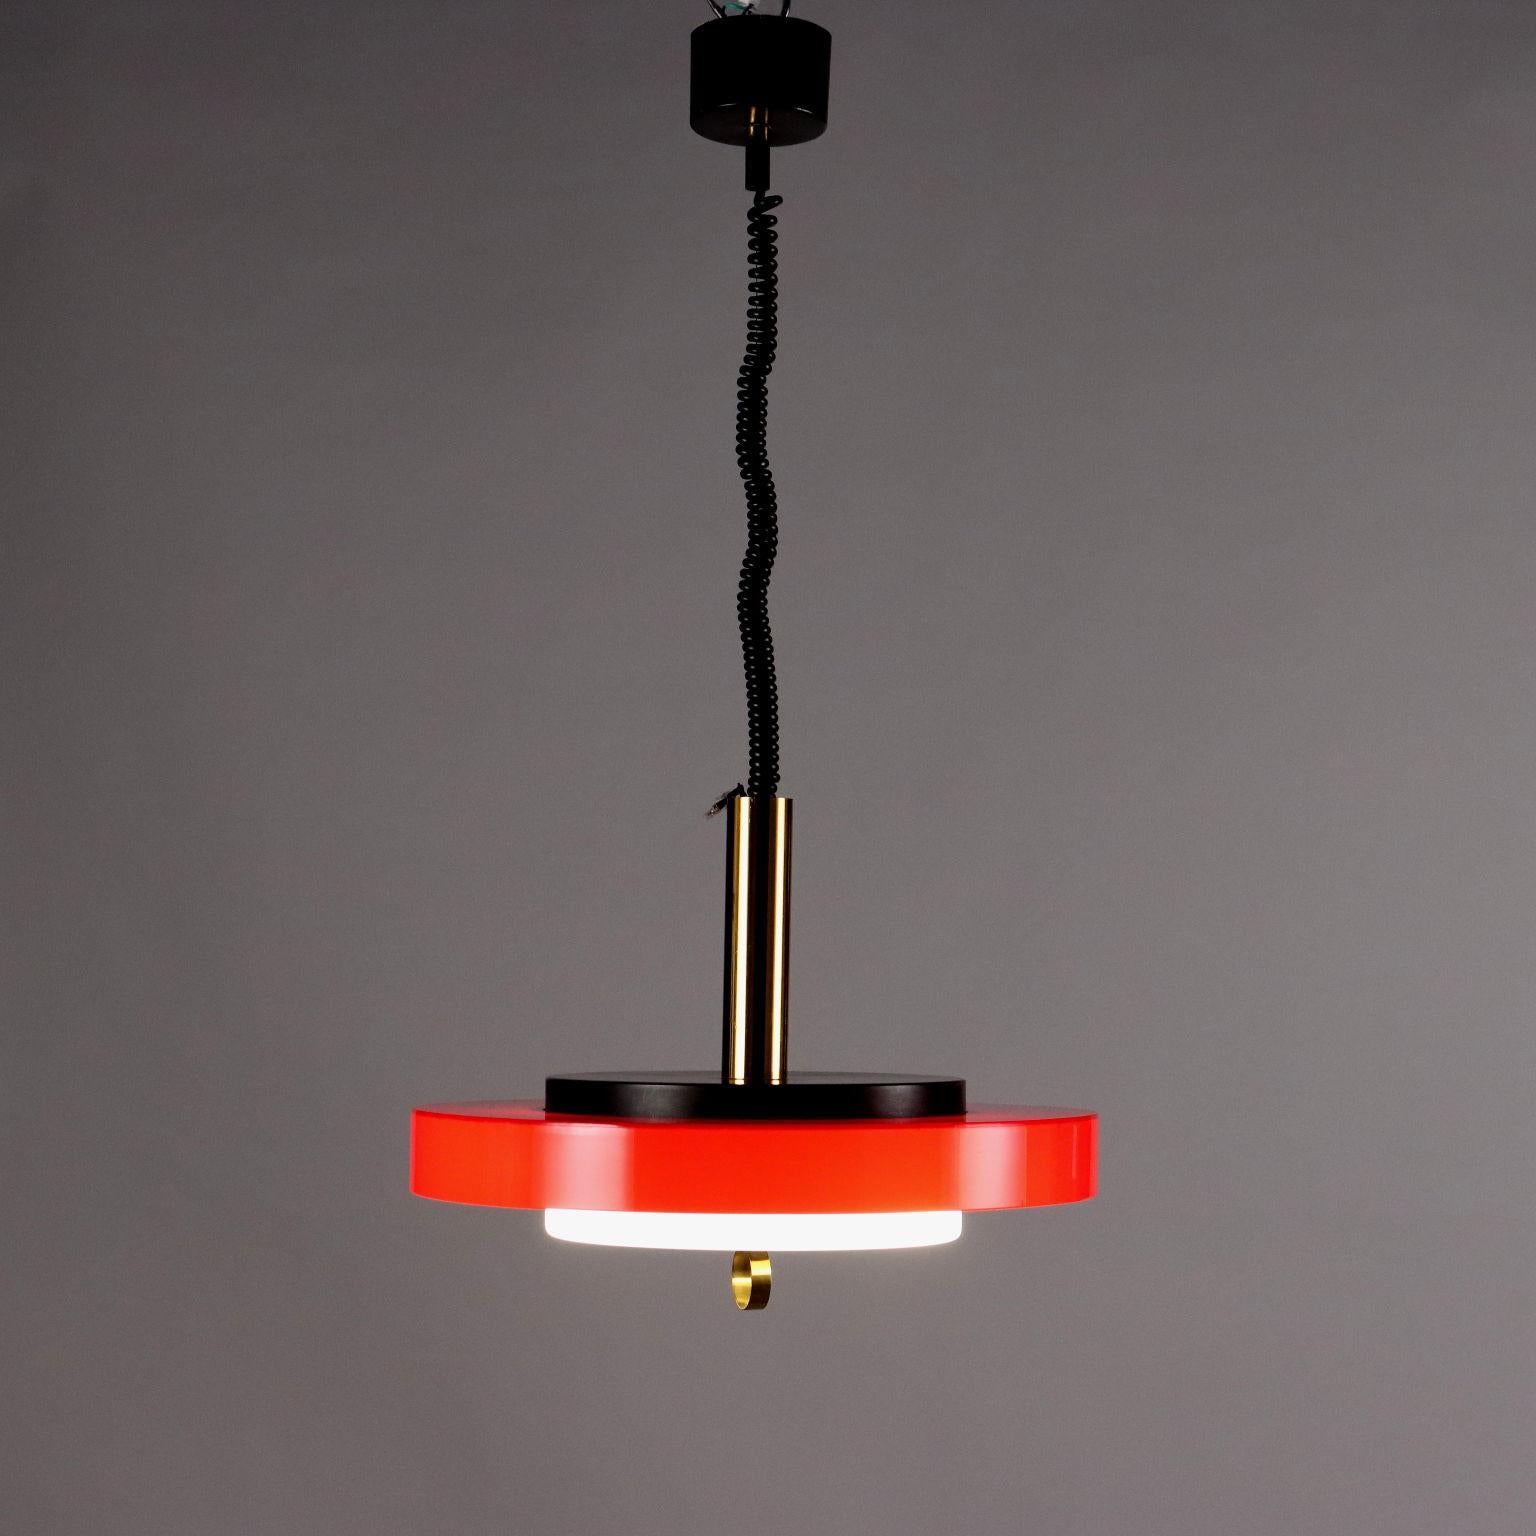 Ceiling lamp with extendable cable for adjustable height made of methacrylate, brass, enameled aluminum and glass.